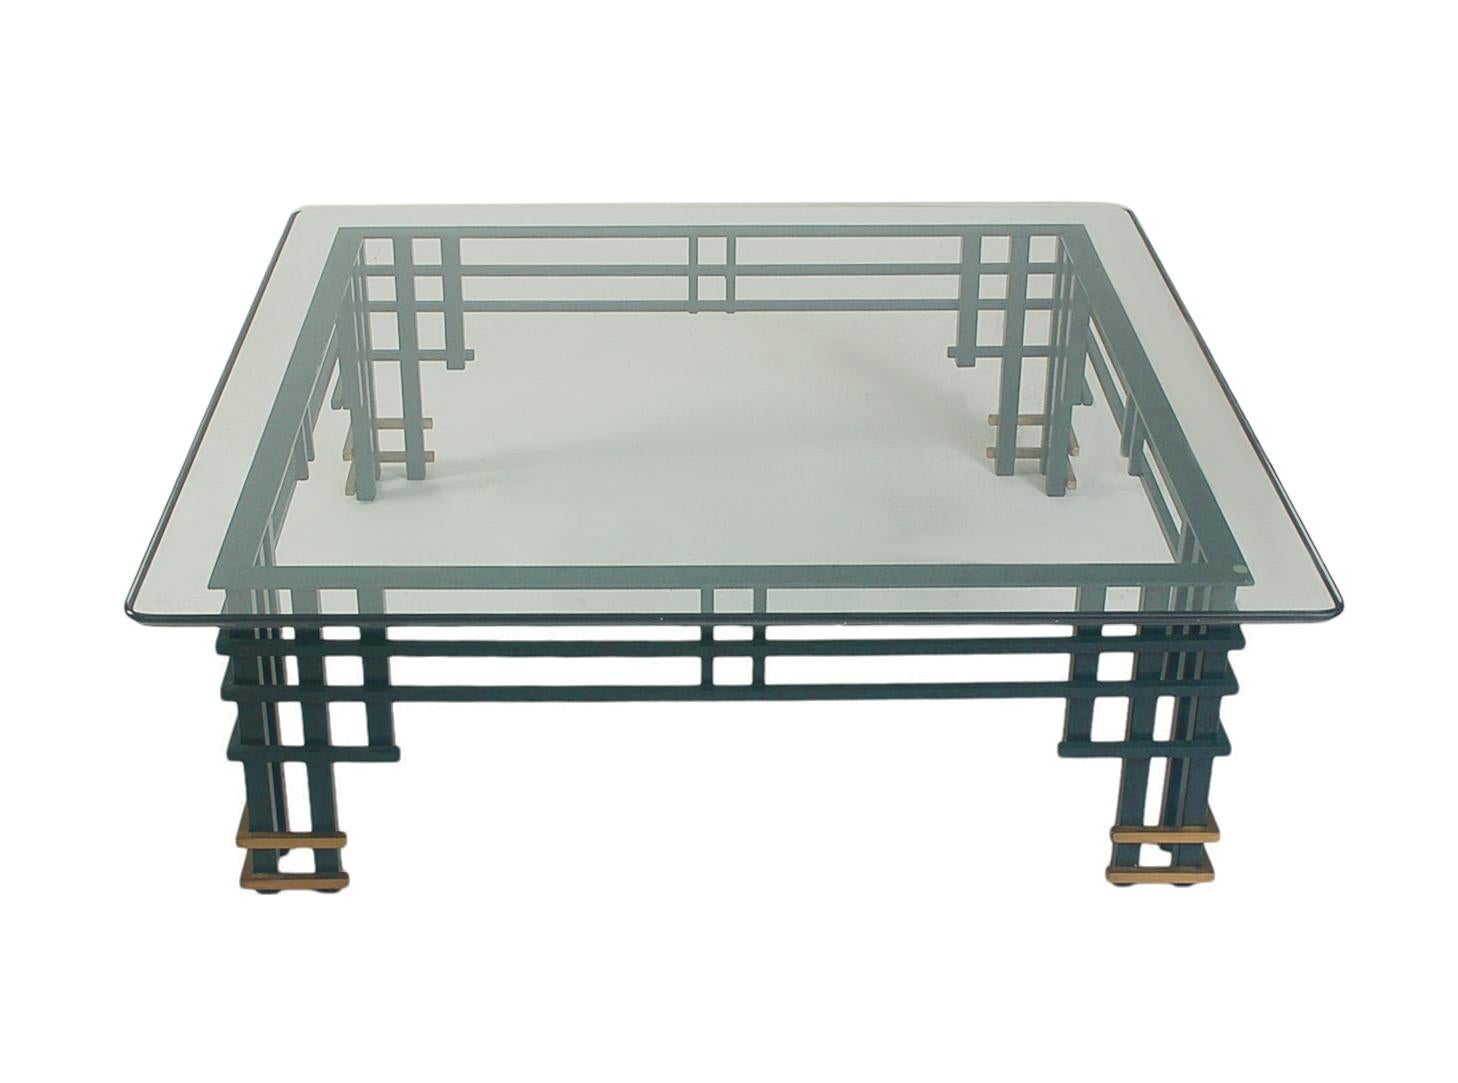 A large and impressive coffee table with an Asian modern contemporary look. It features emerald green coated steel, brass accents, thick clear glass top. Very clean ready to use condition.